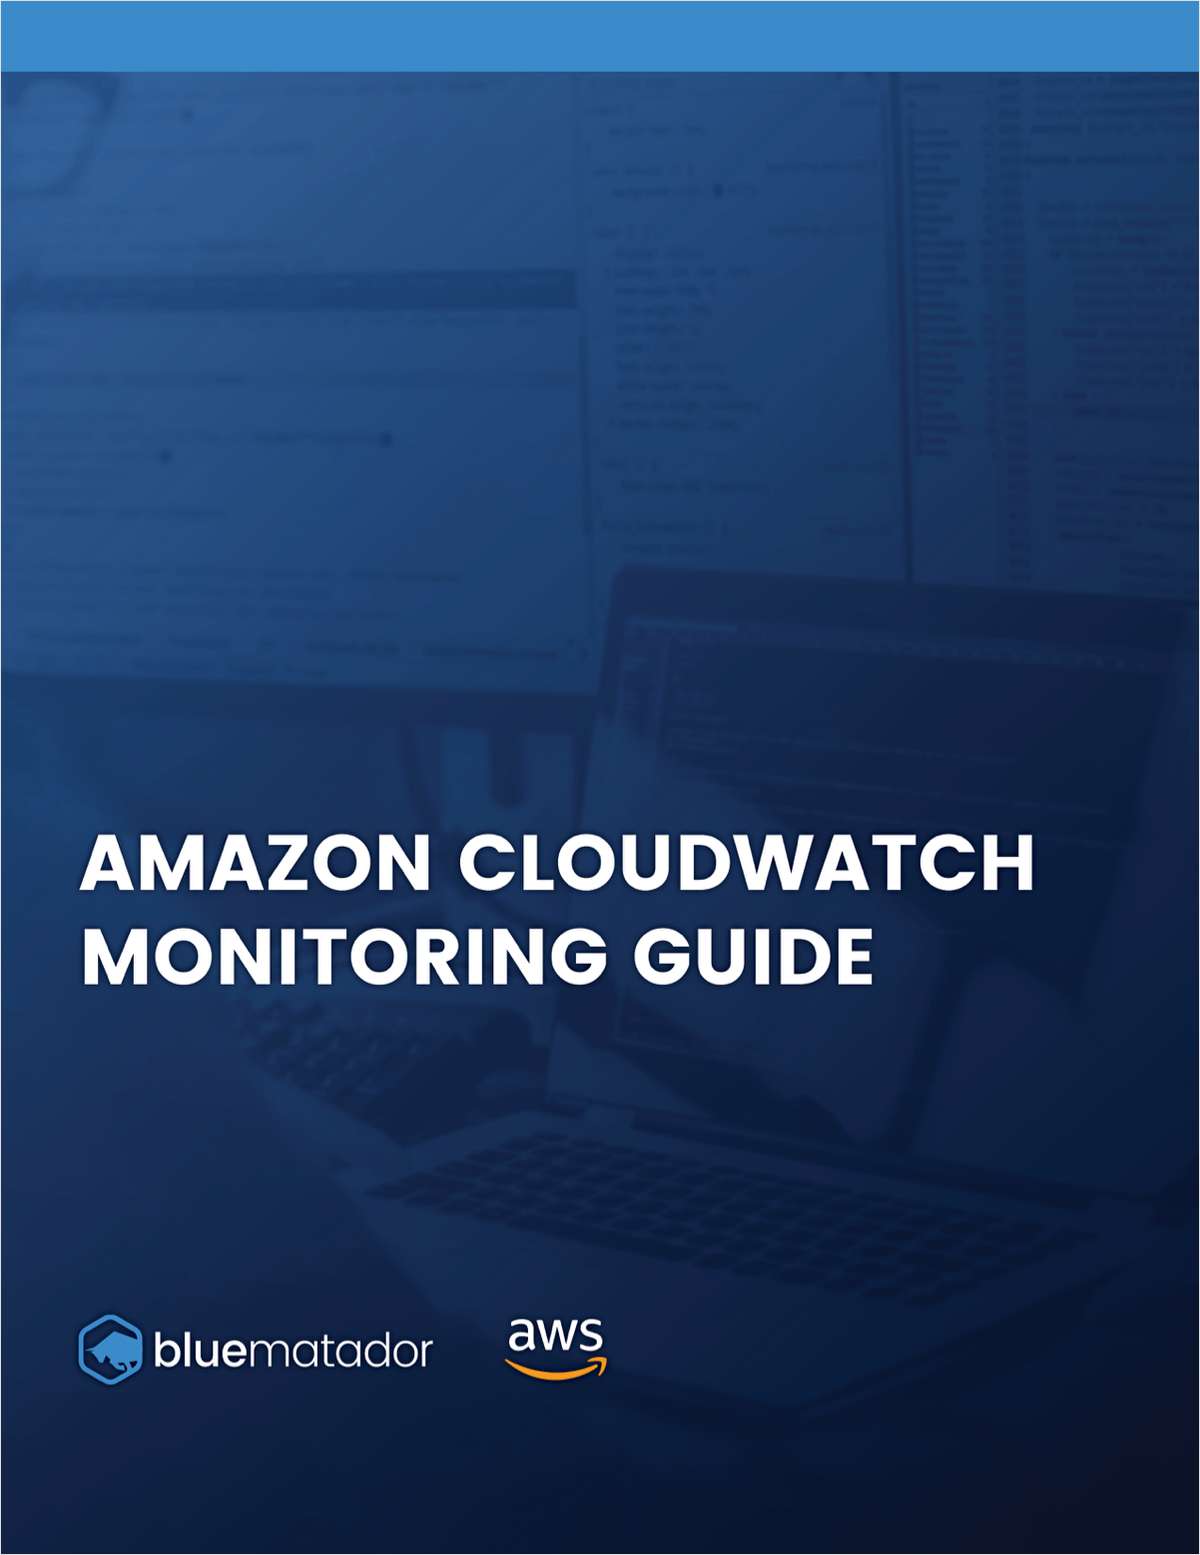 THE COMPLETE GUIDE TO AMAZON CLOUDWATCH